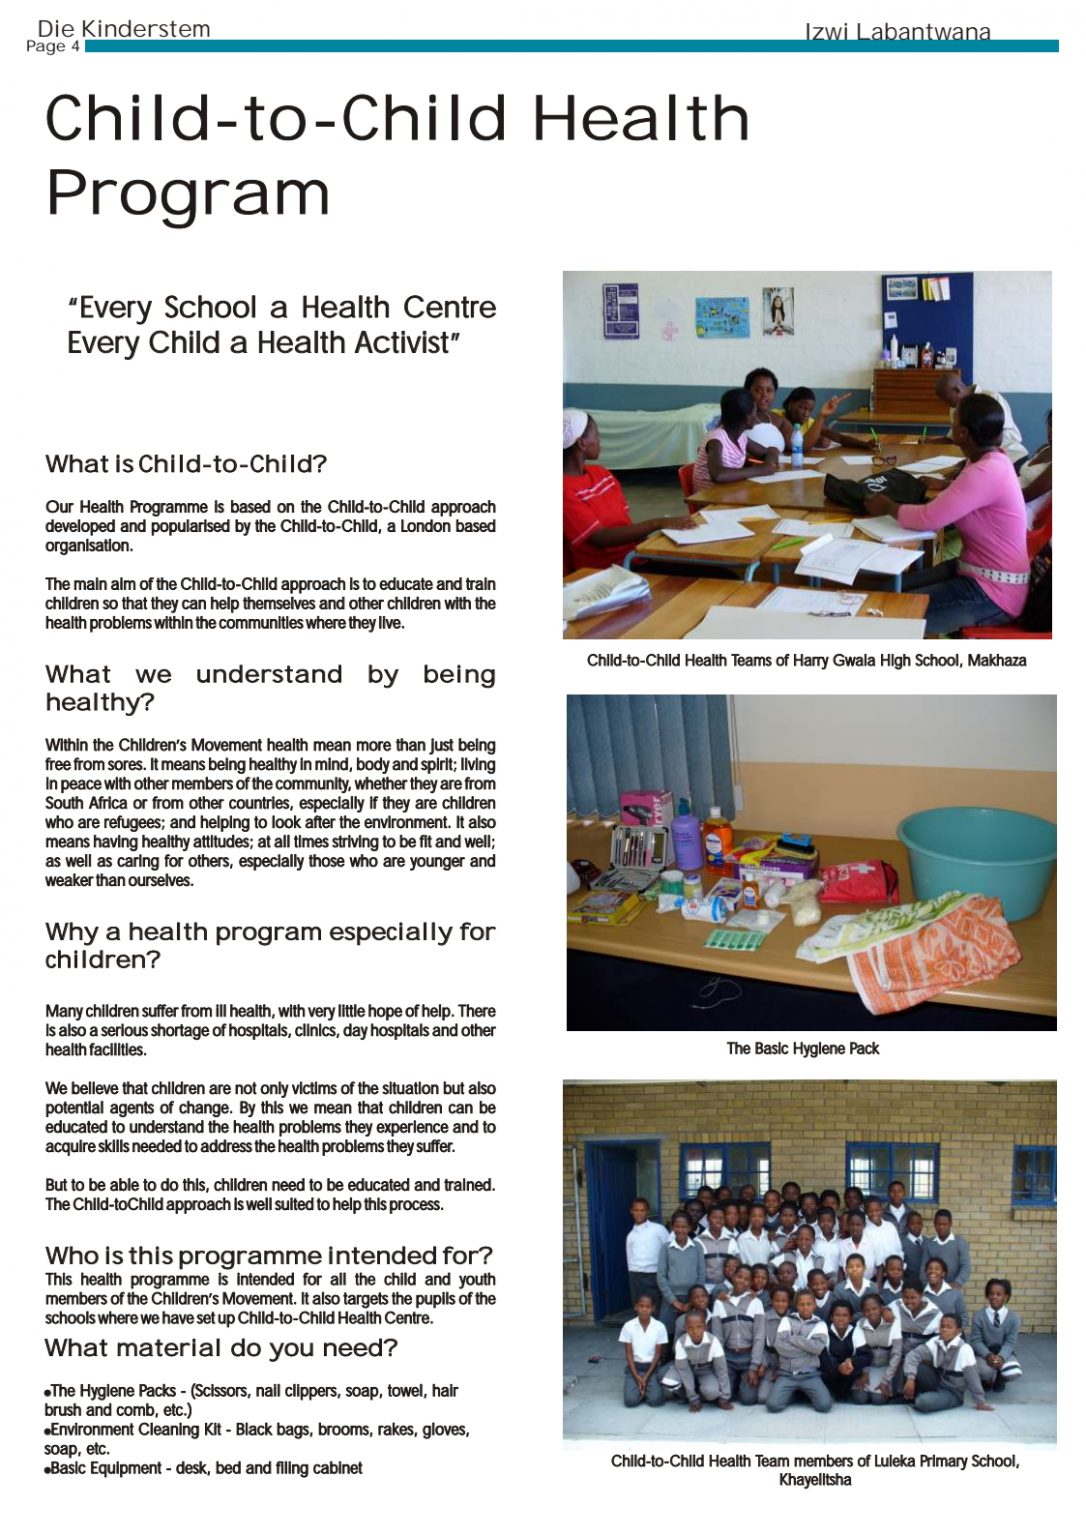 Article on the Child to Child Health Program from Voice of the Children newsletter, June 2008.